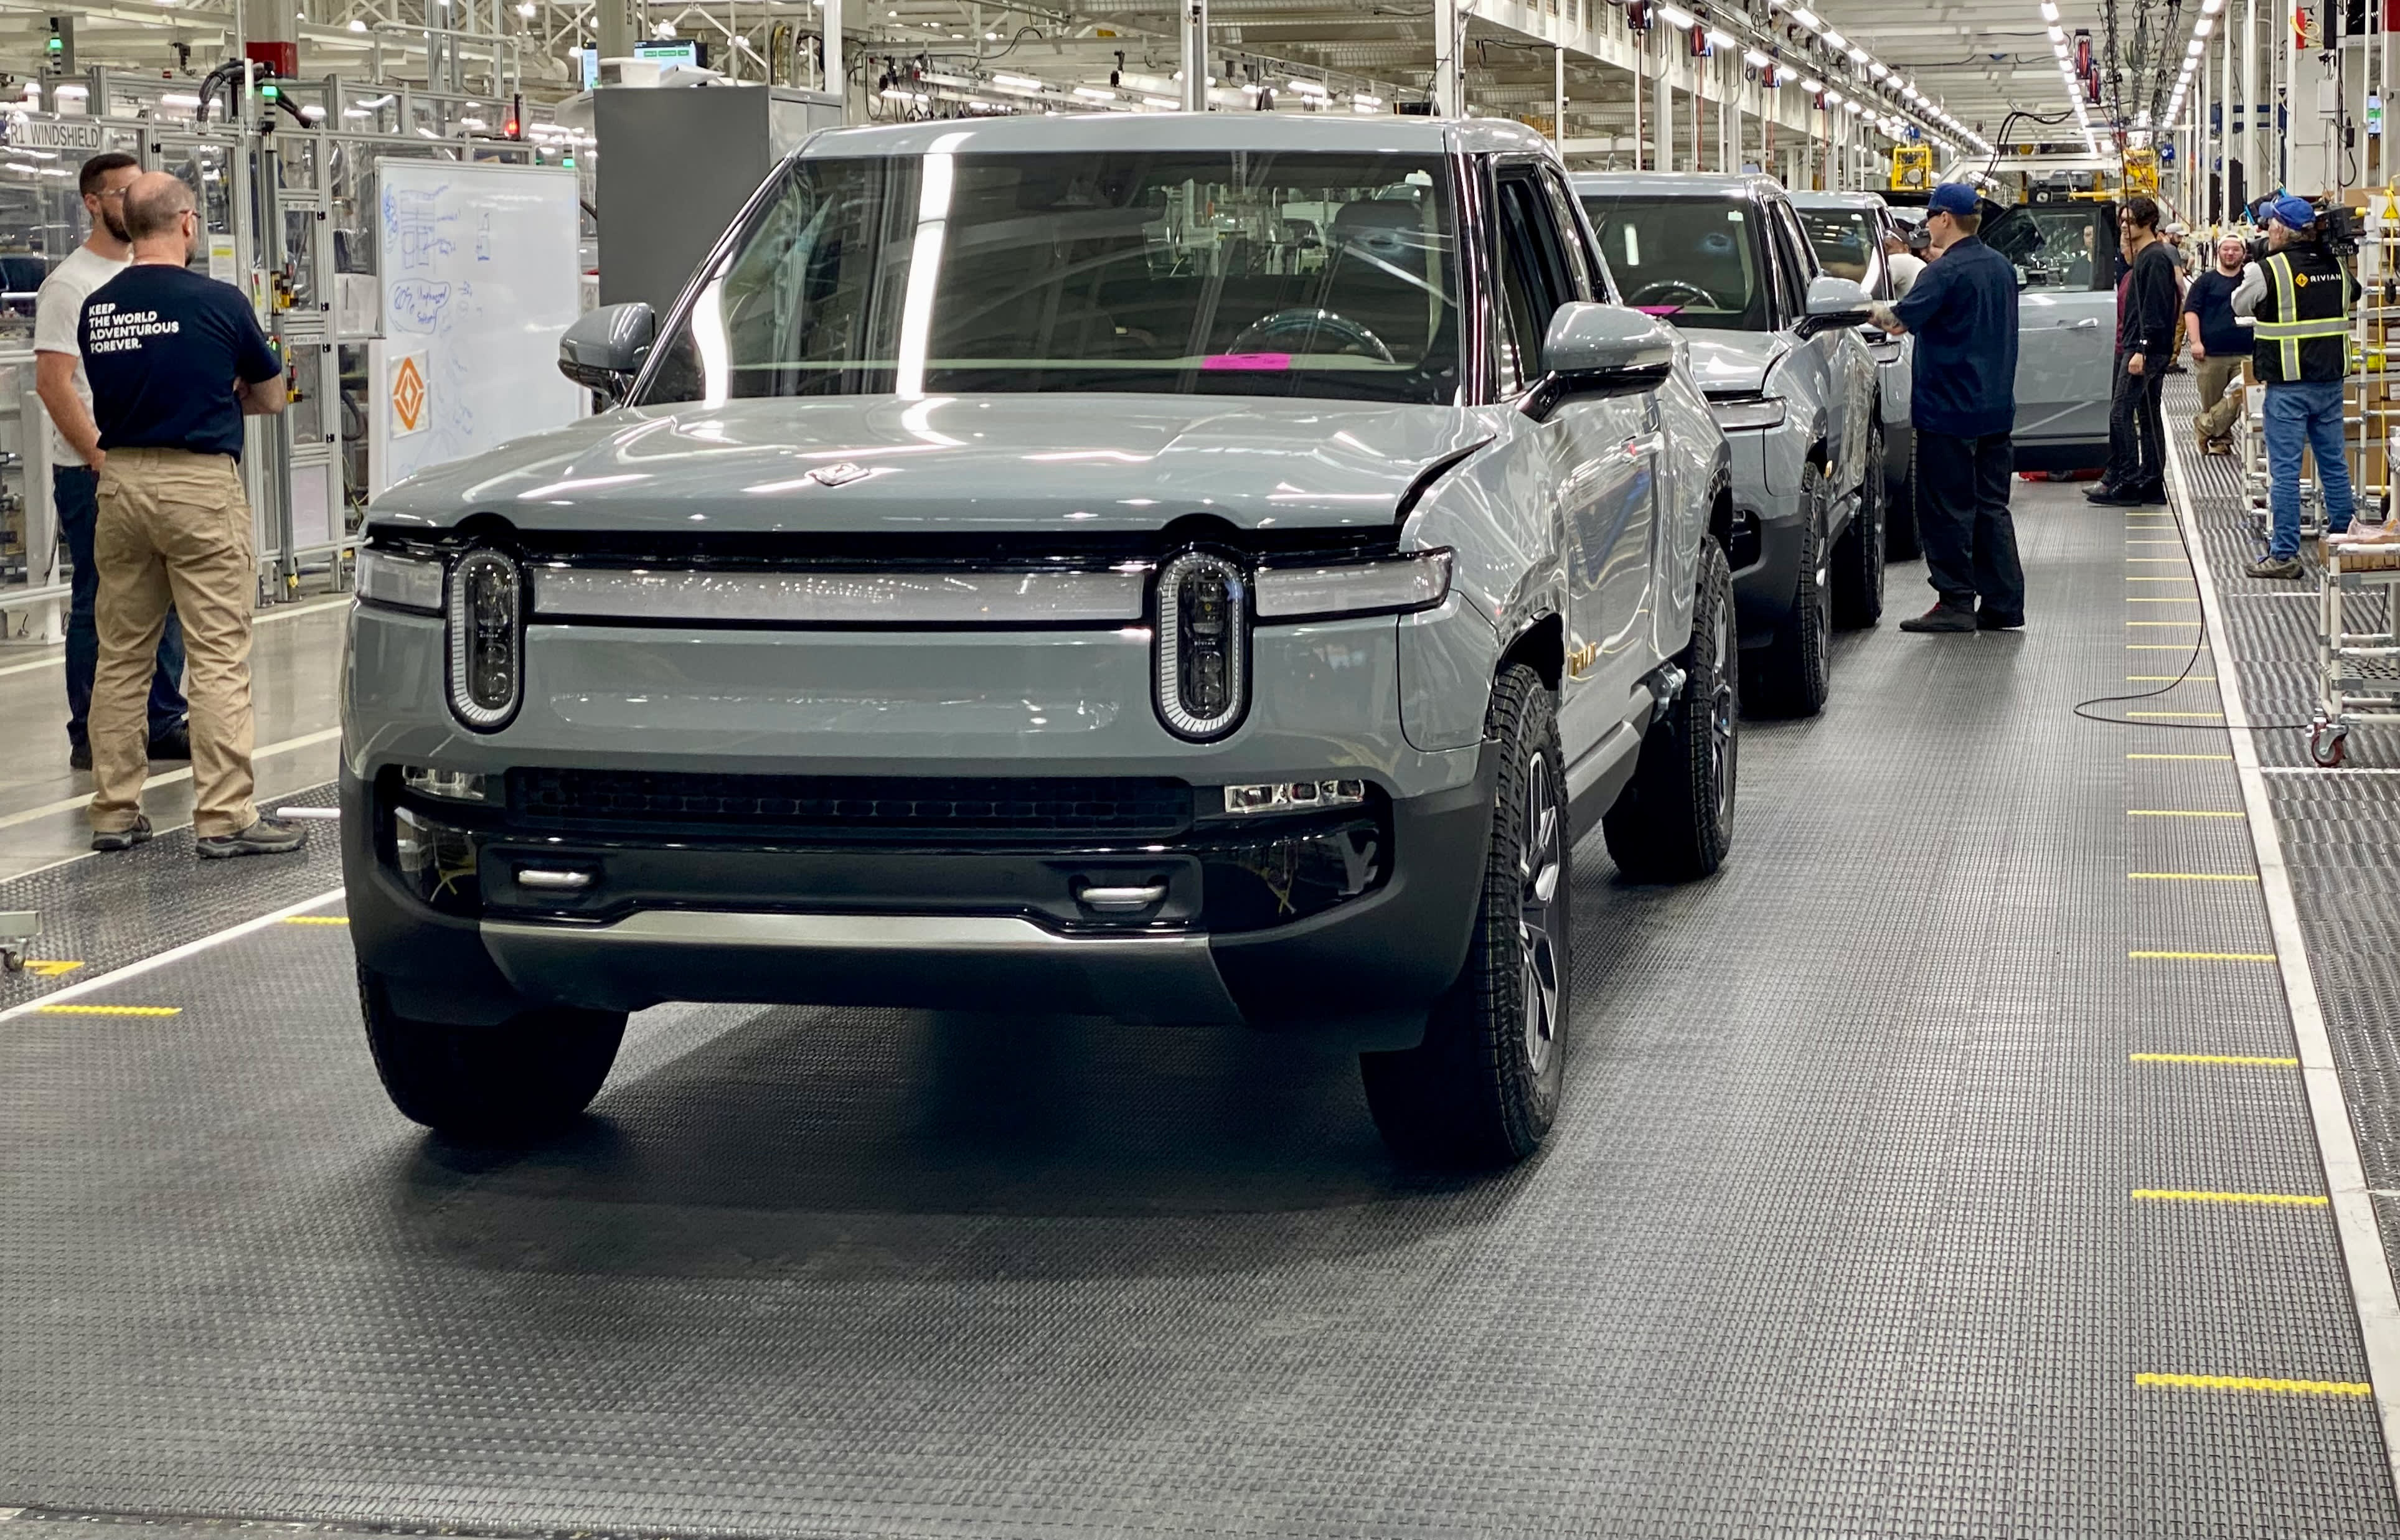 Resolve Alignment Issues Before Delivering: Rivian Needs to Ensure Proper Vehicle Service